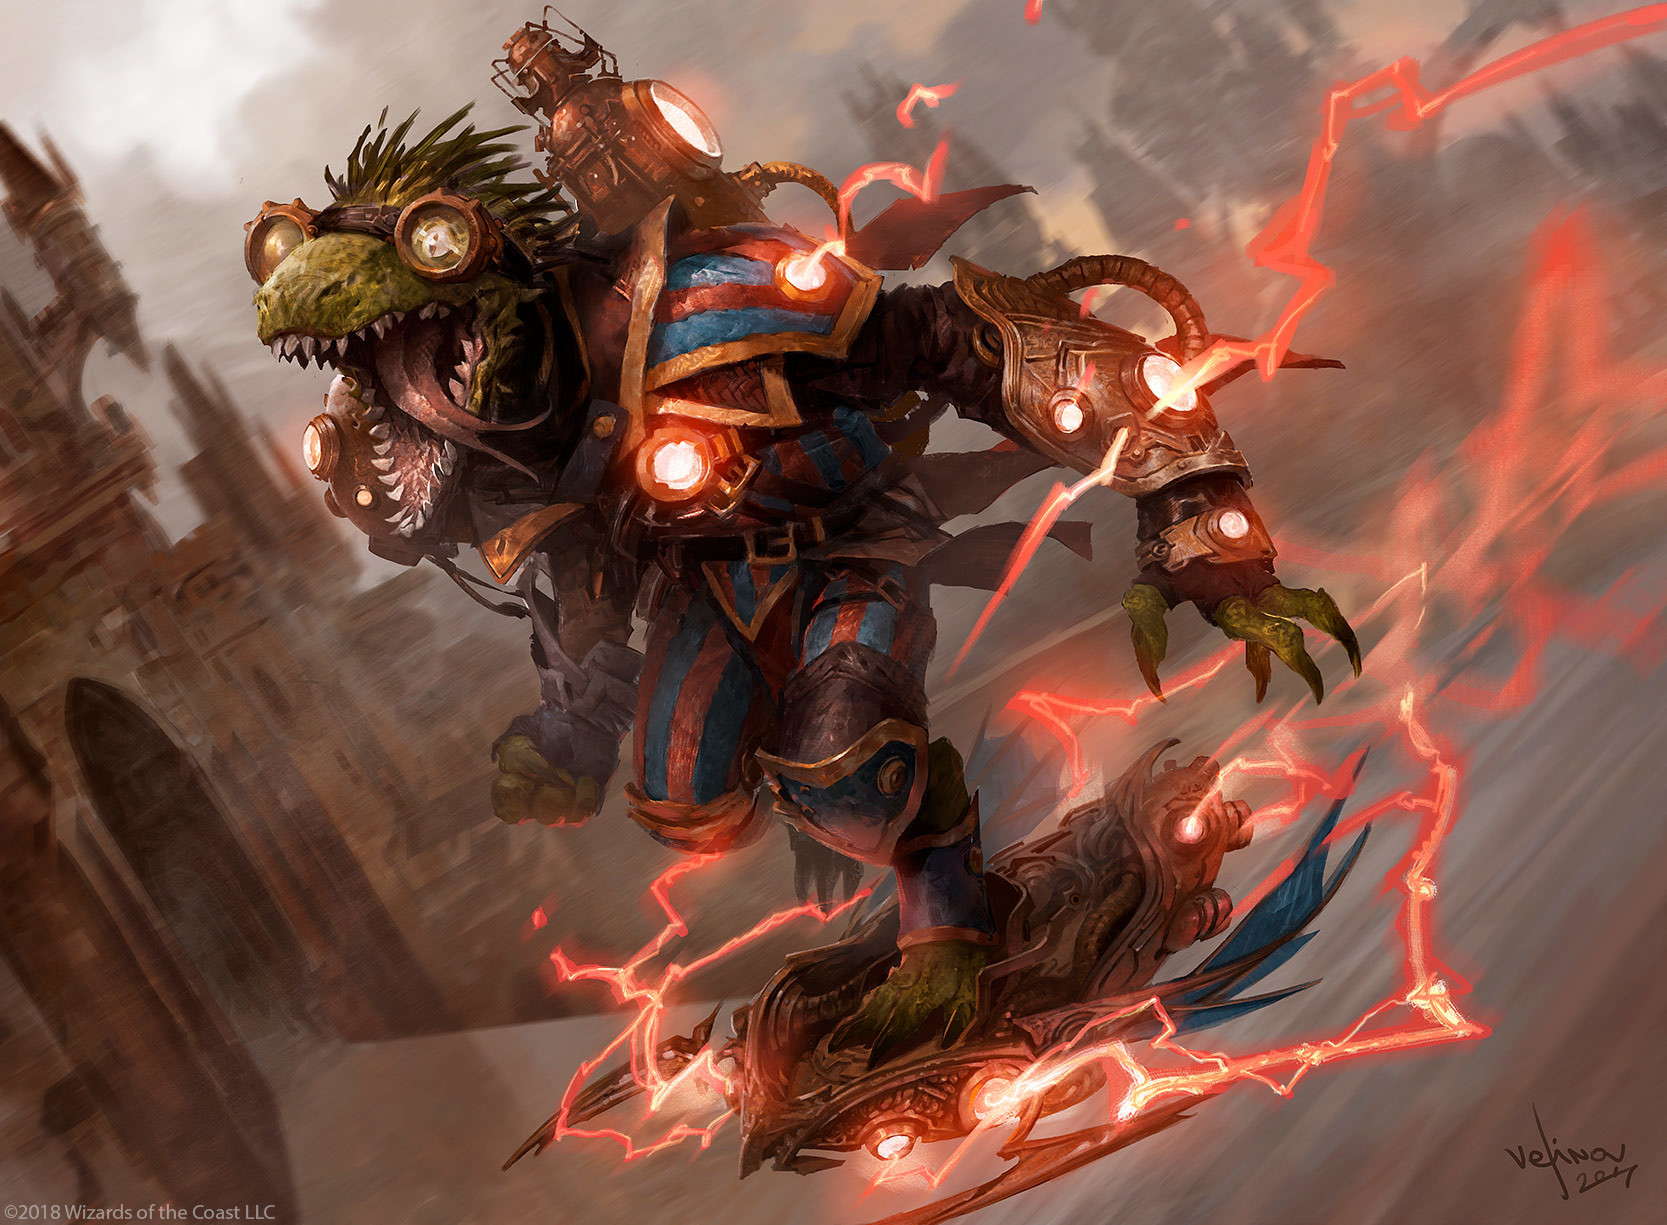 Tasha’s Cauldron Of Everything: The Armorer Artificer Receives Final Print In Wizards Of The Coast’s Newest Rules Expansion